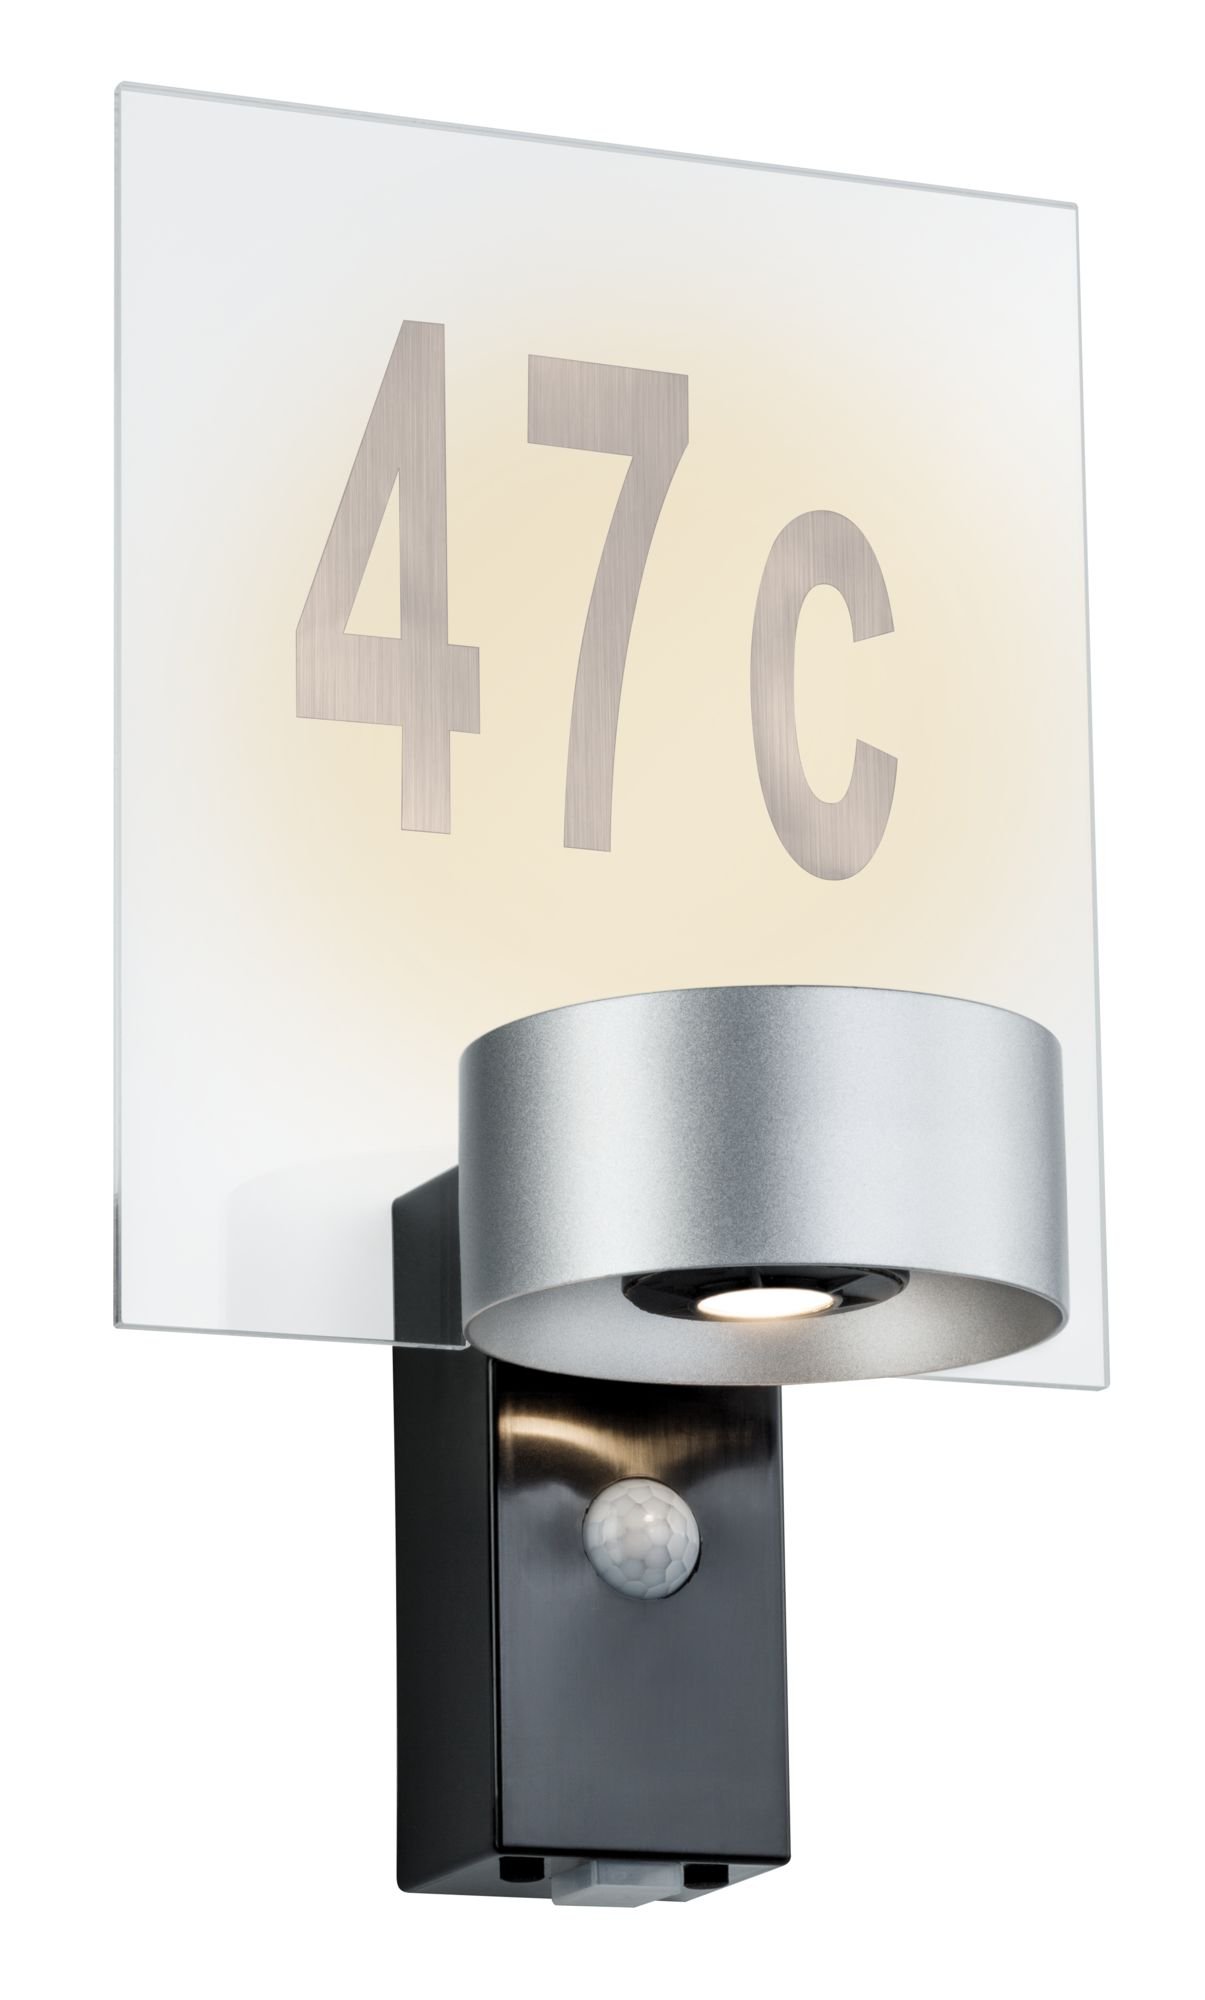 House wall luminaire Cone IP44 3,000 K 8 W Silver/ Anthracite with motion sensor.